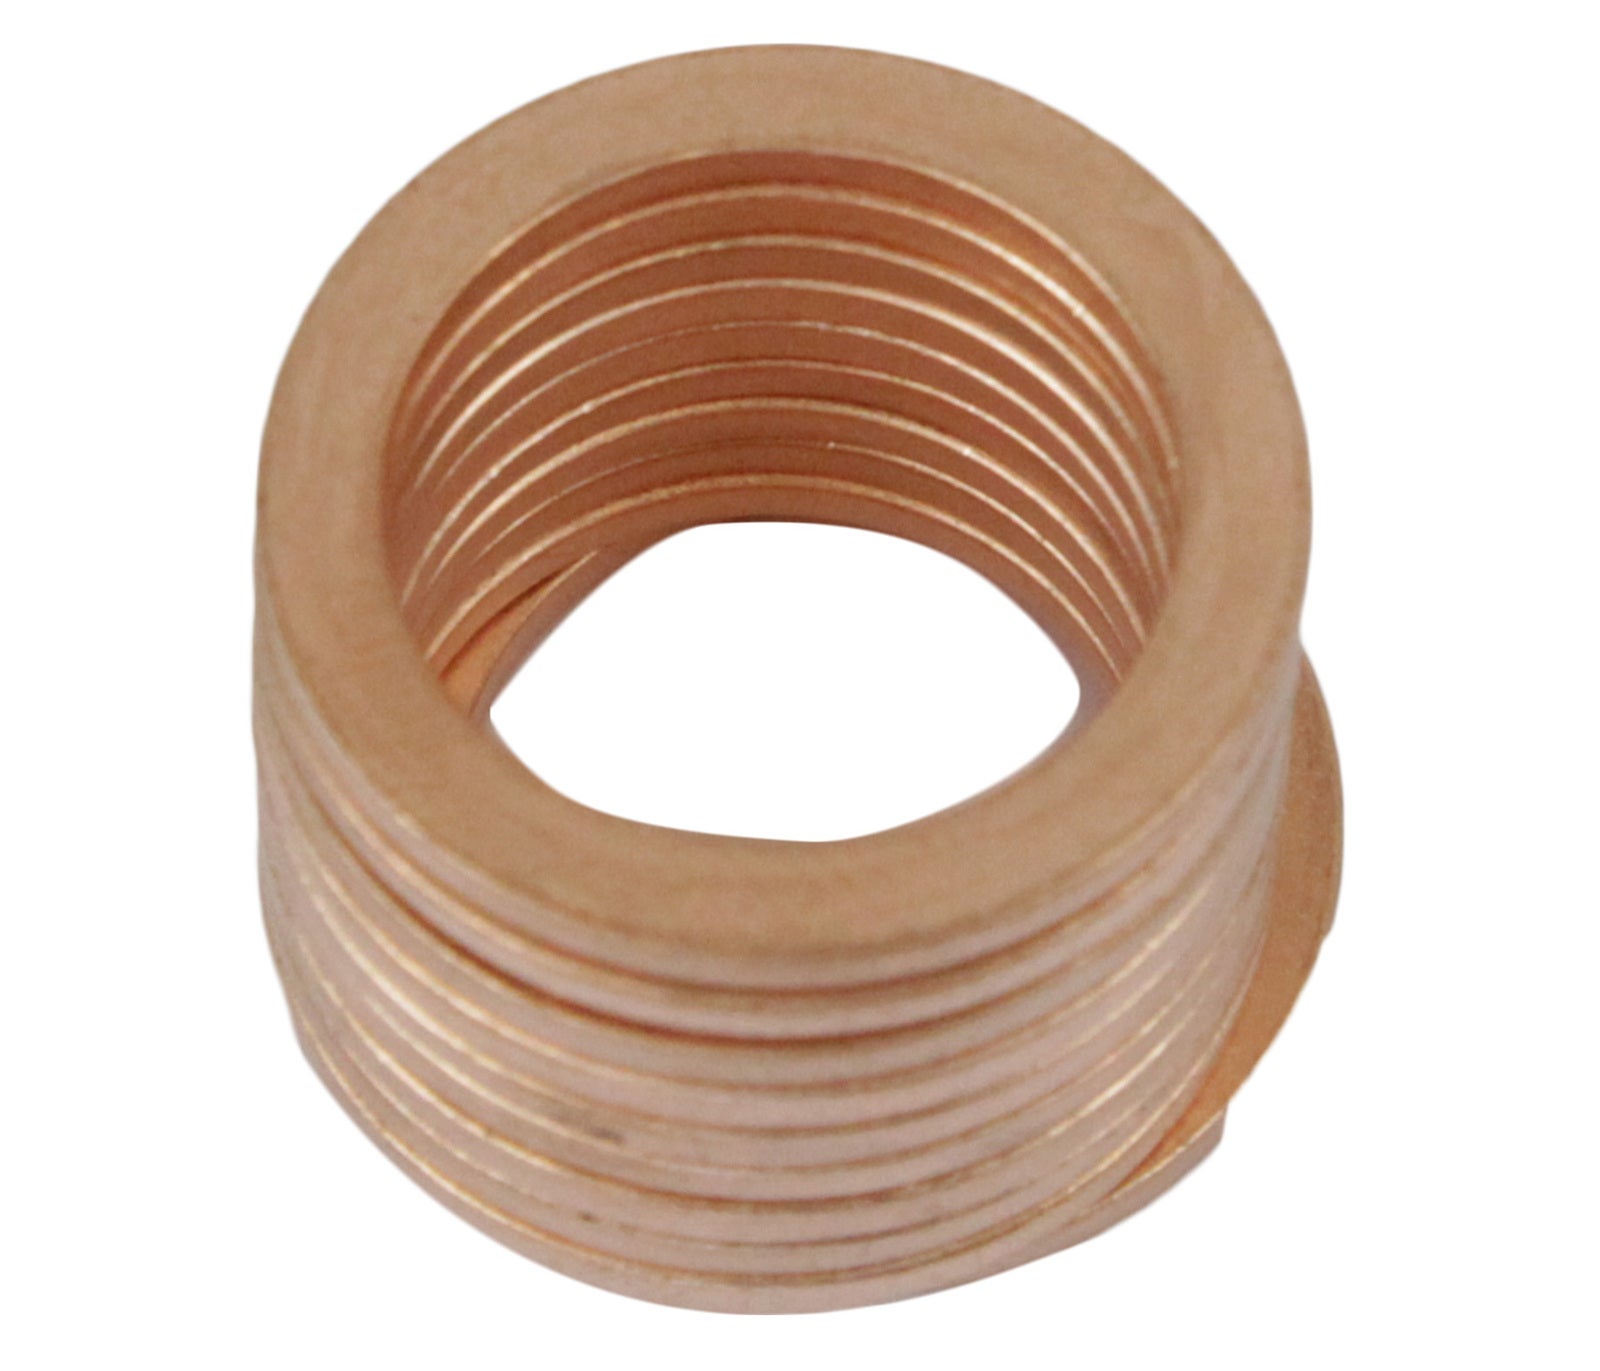 Proflow Copper Washer 8mm 10 Pack PFE179-8M